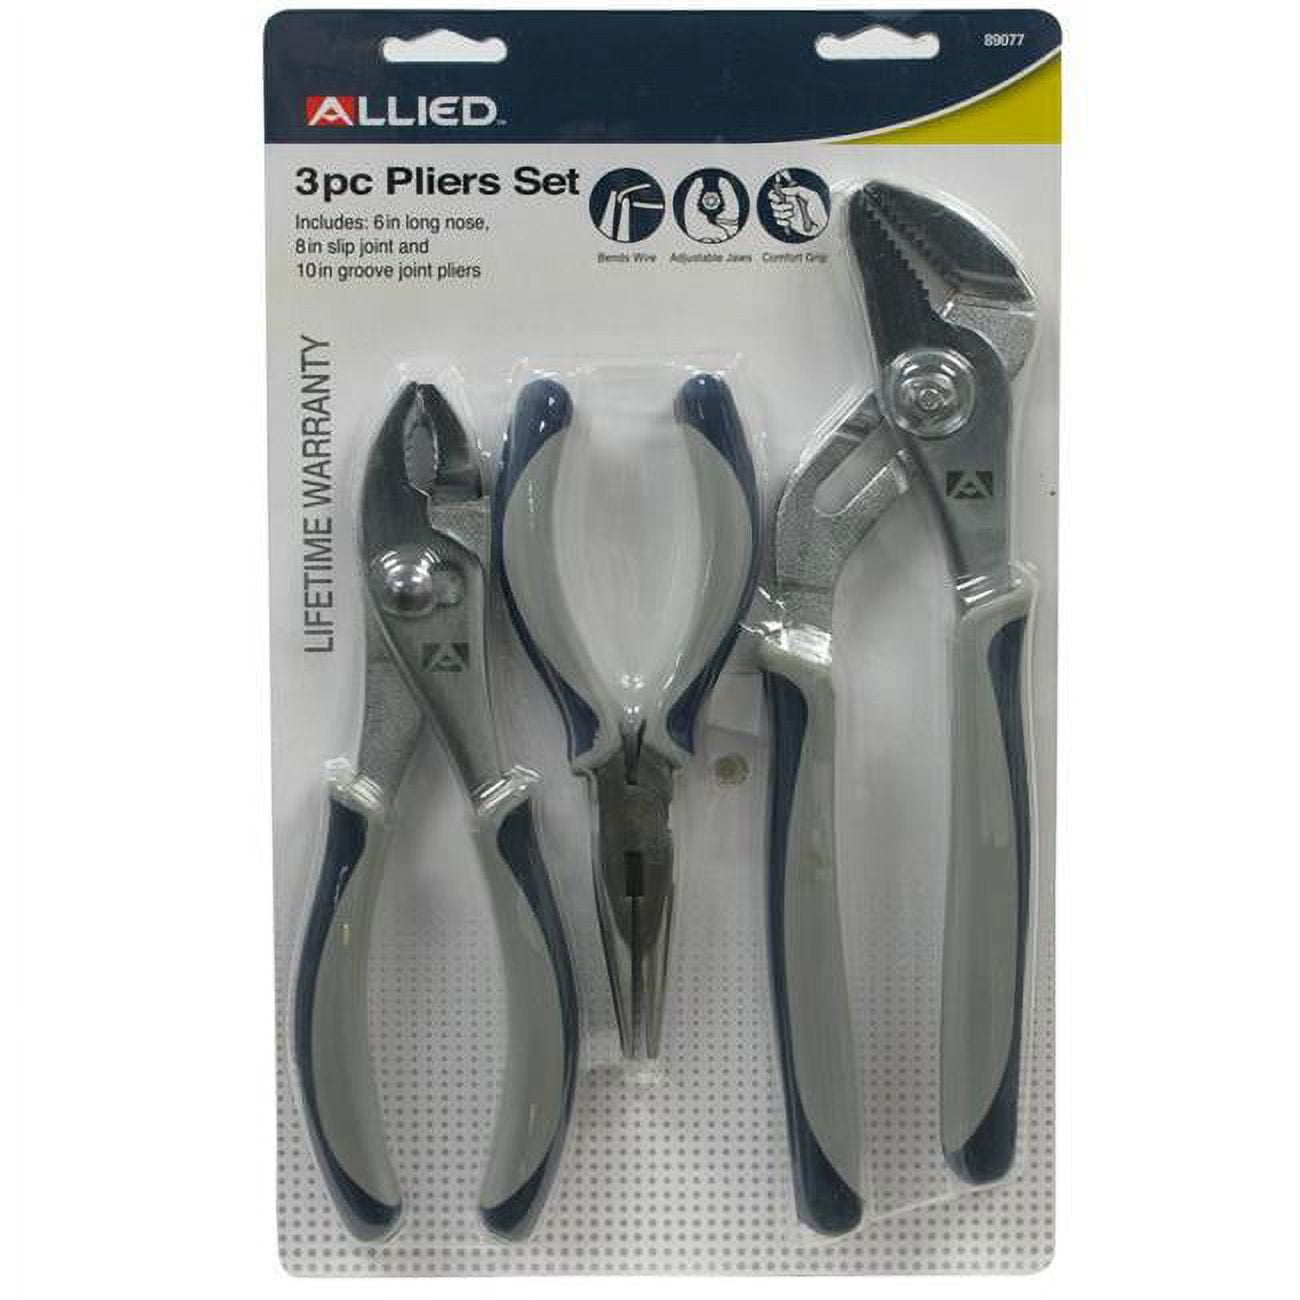 Picture of Allied 89077 Pliers Set - 3 Piece